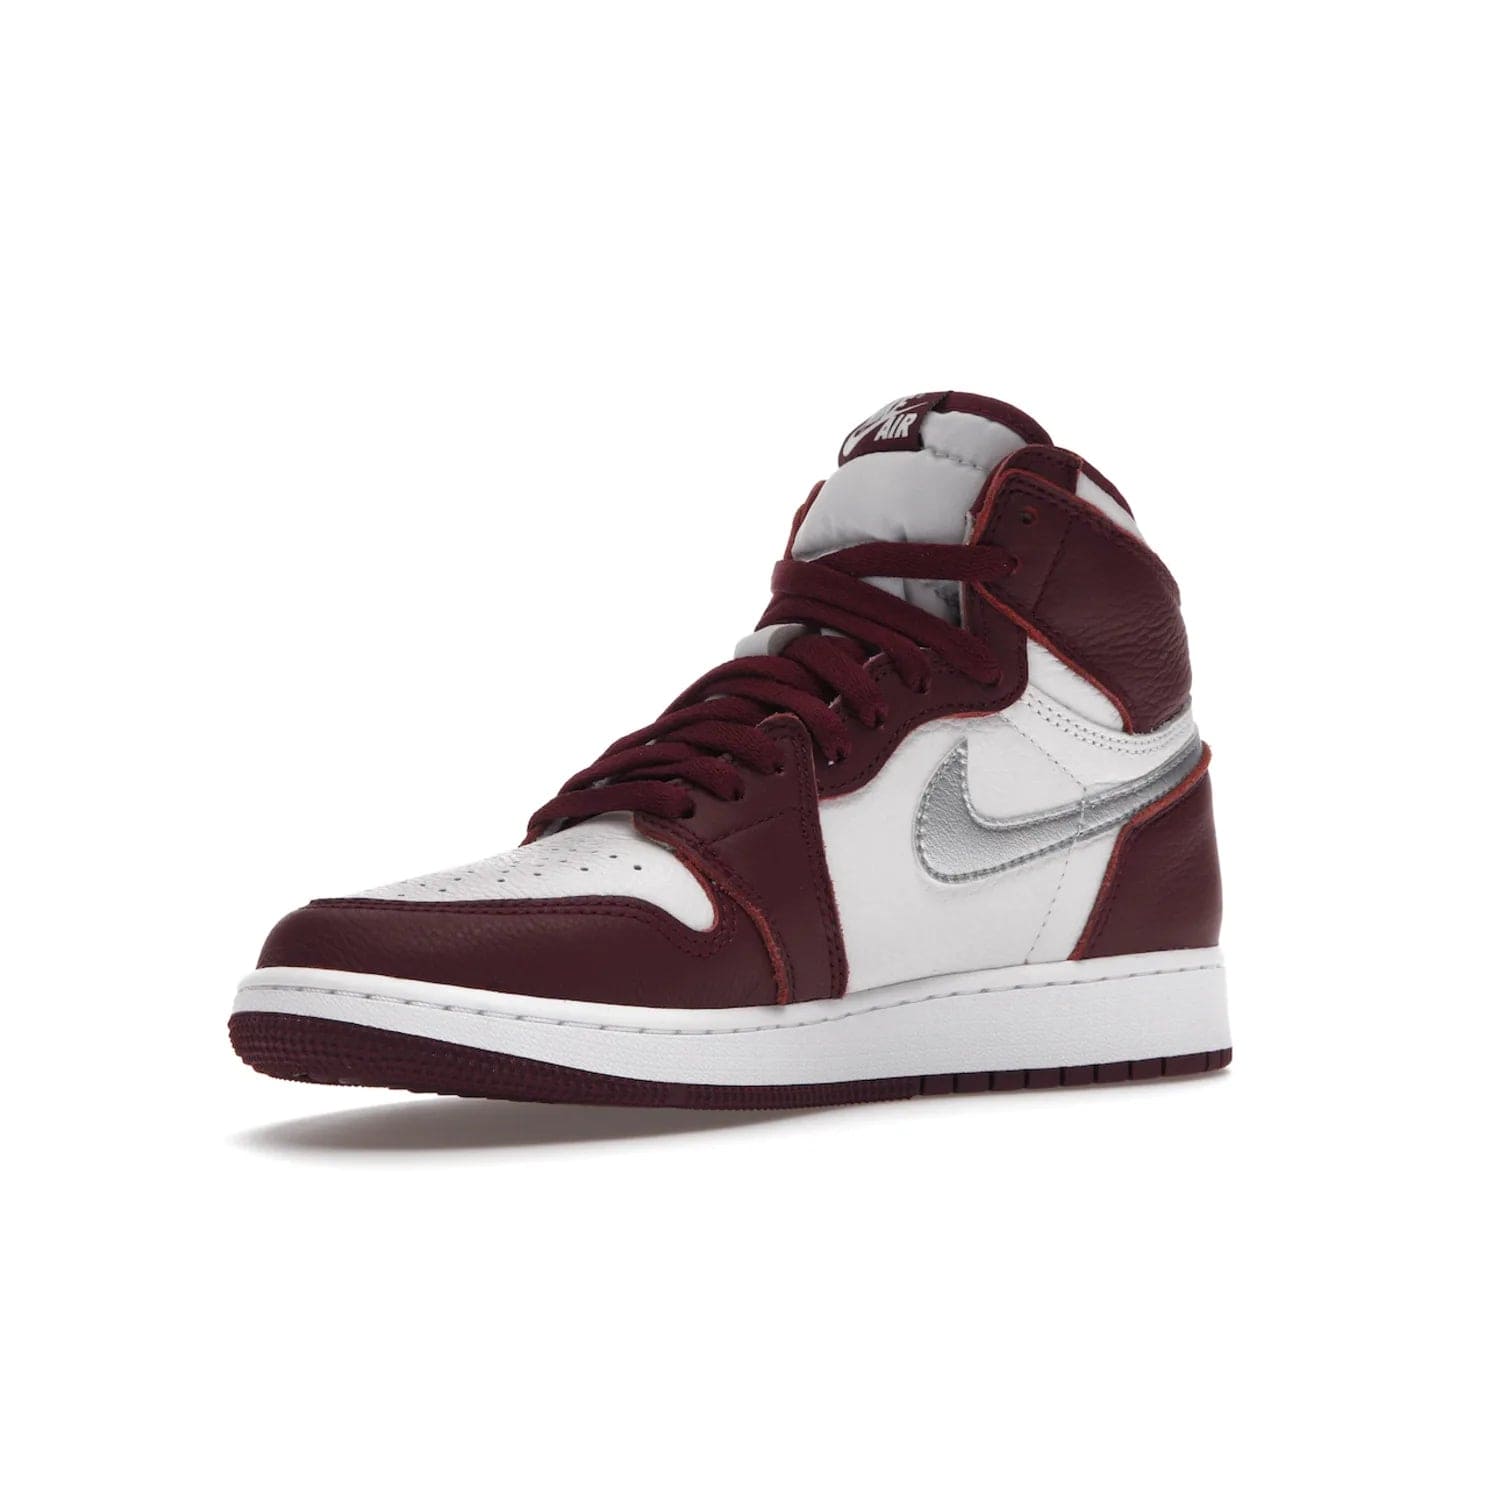 Jordan 1 Retro High OG Bordeaux (GS) - Image 15 - Only at www.BallersClubKickz.com - #
Introducing the Air Jordan 1 Retro High OG Bordeaux GS – a signature colorway part of the Jordan Brand Fall 2021 lineup. White leather upper & Bordeaux overlays, metallic silver swoosh, jeweled Air Jordan Wings logo & more. Step up your style game with this sleek fall season silhouette.